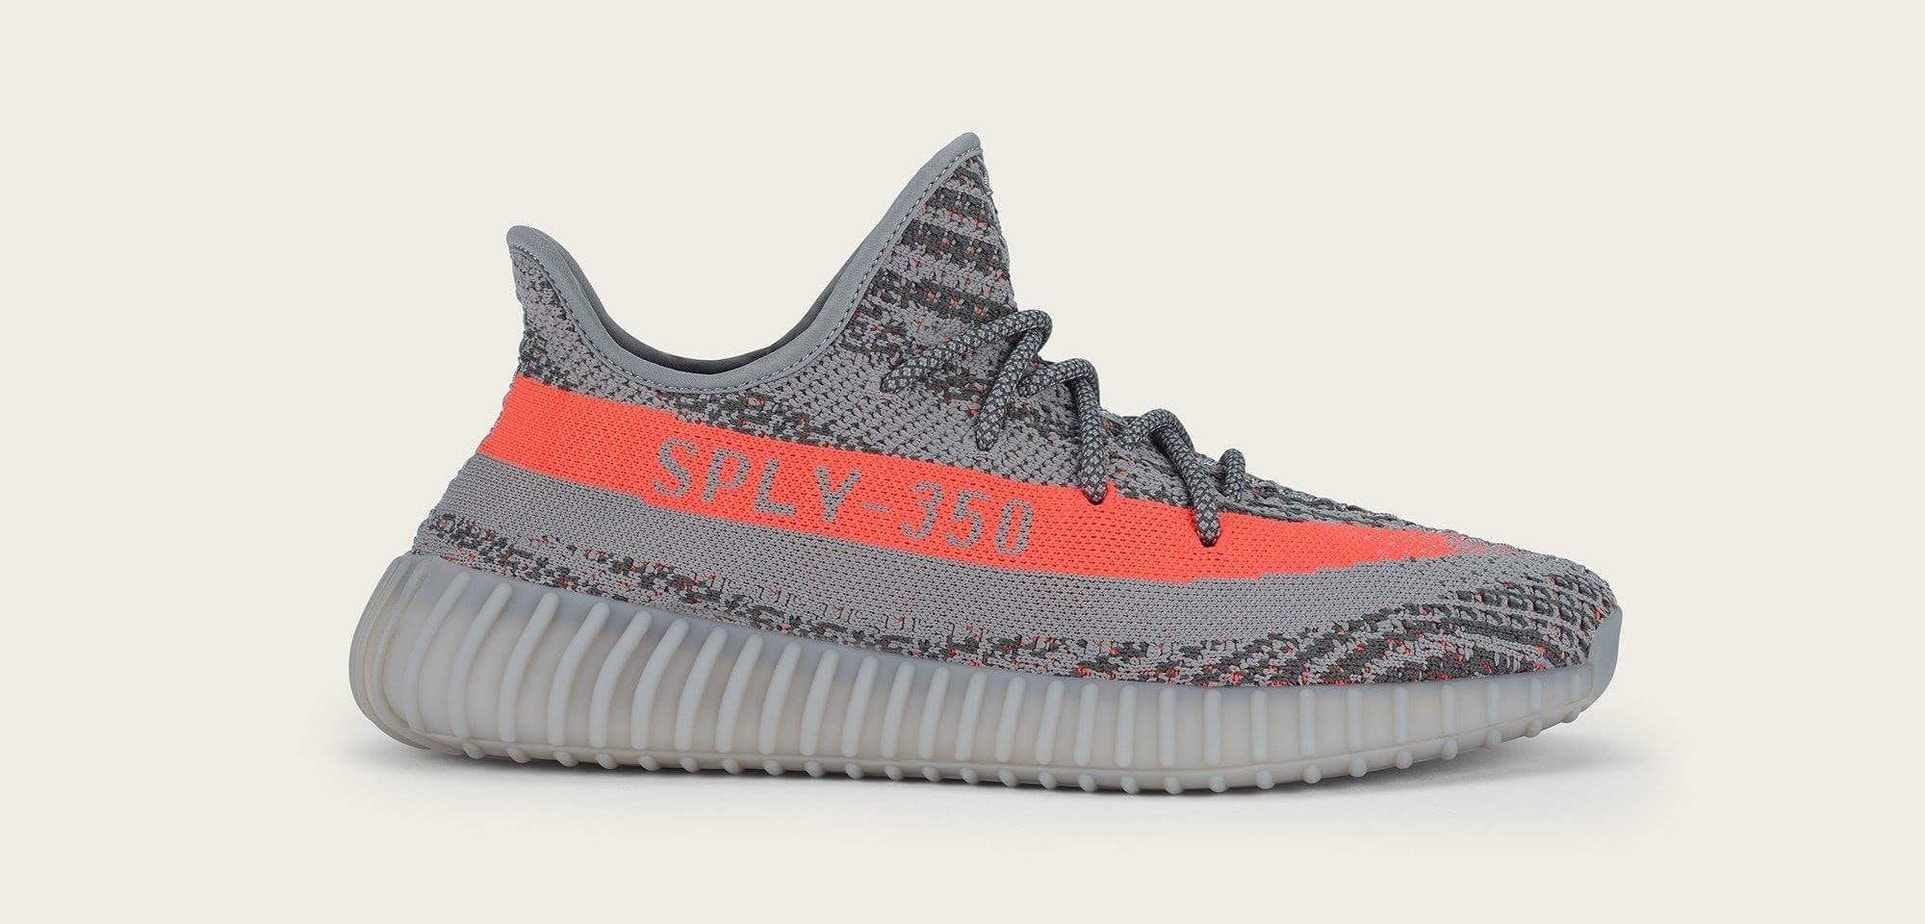 Detailed Images Of The adidas Yeezy Boost 350 v2 Beluga